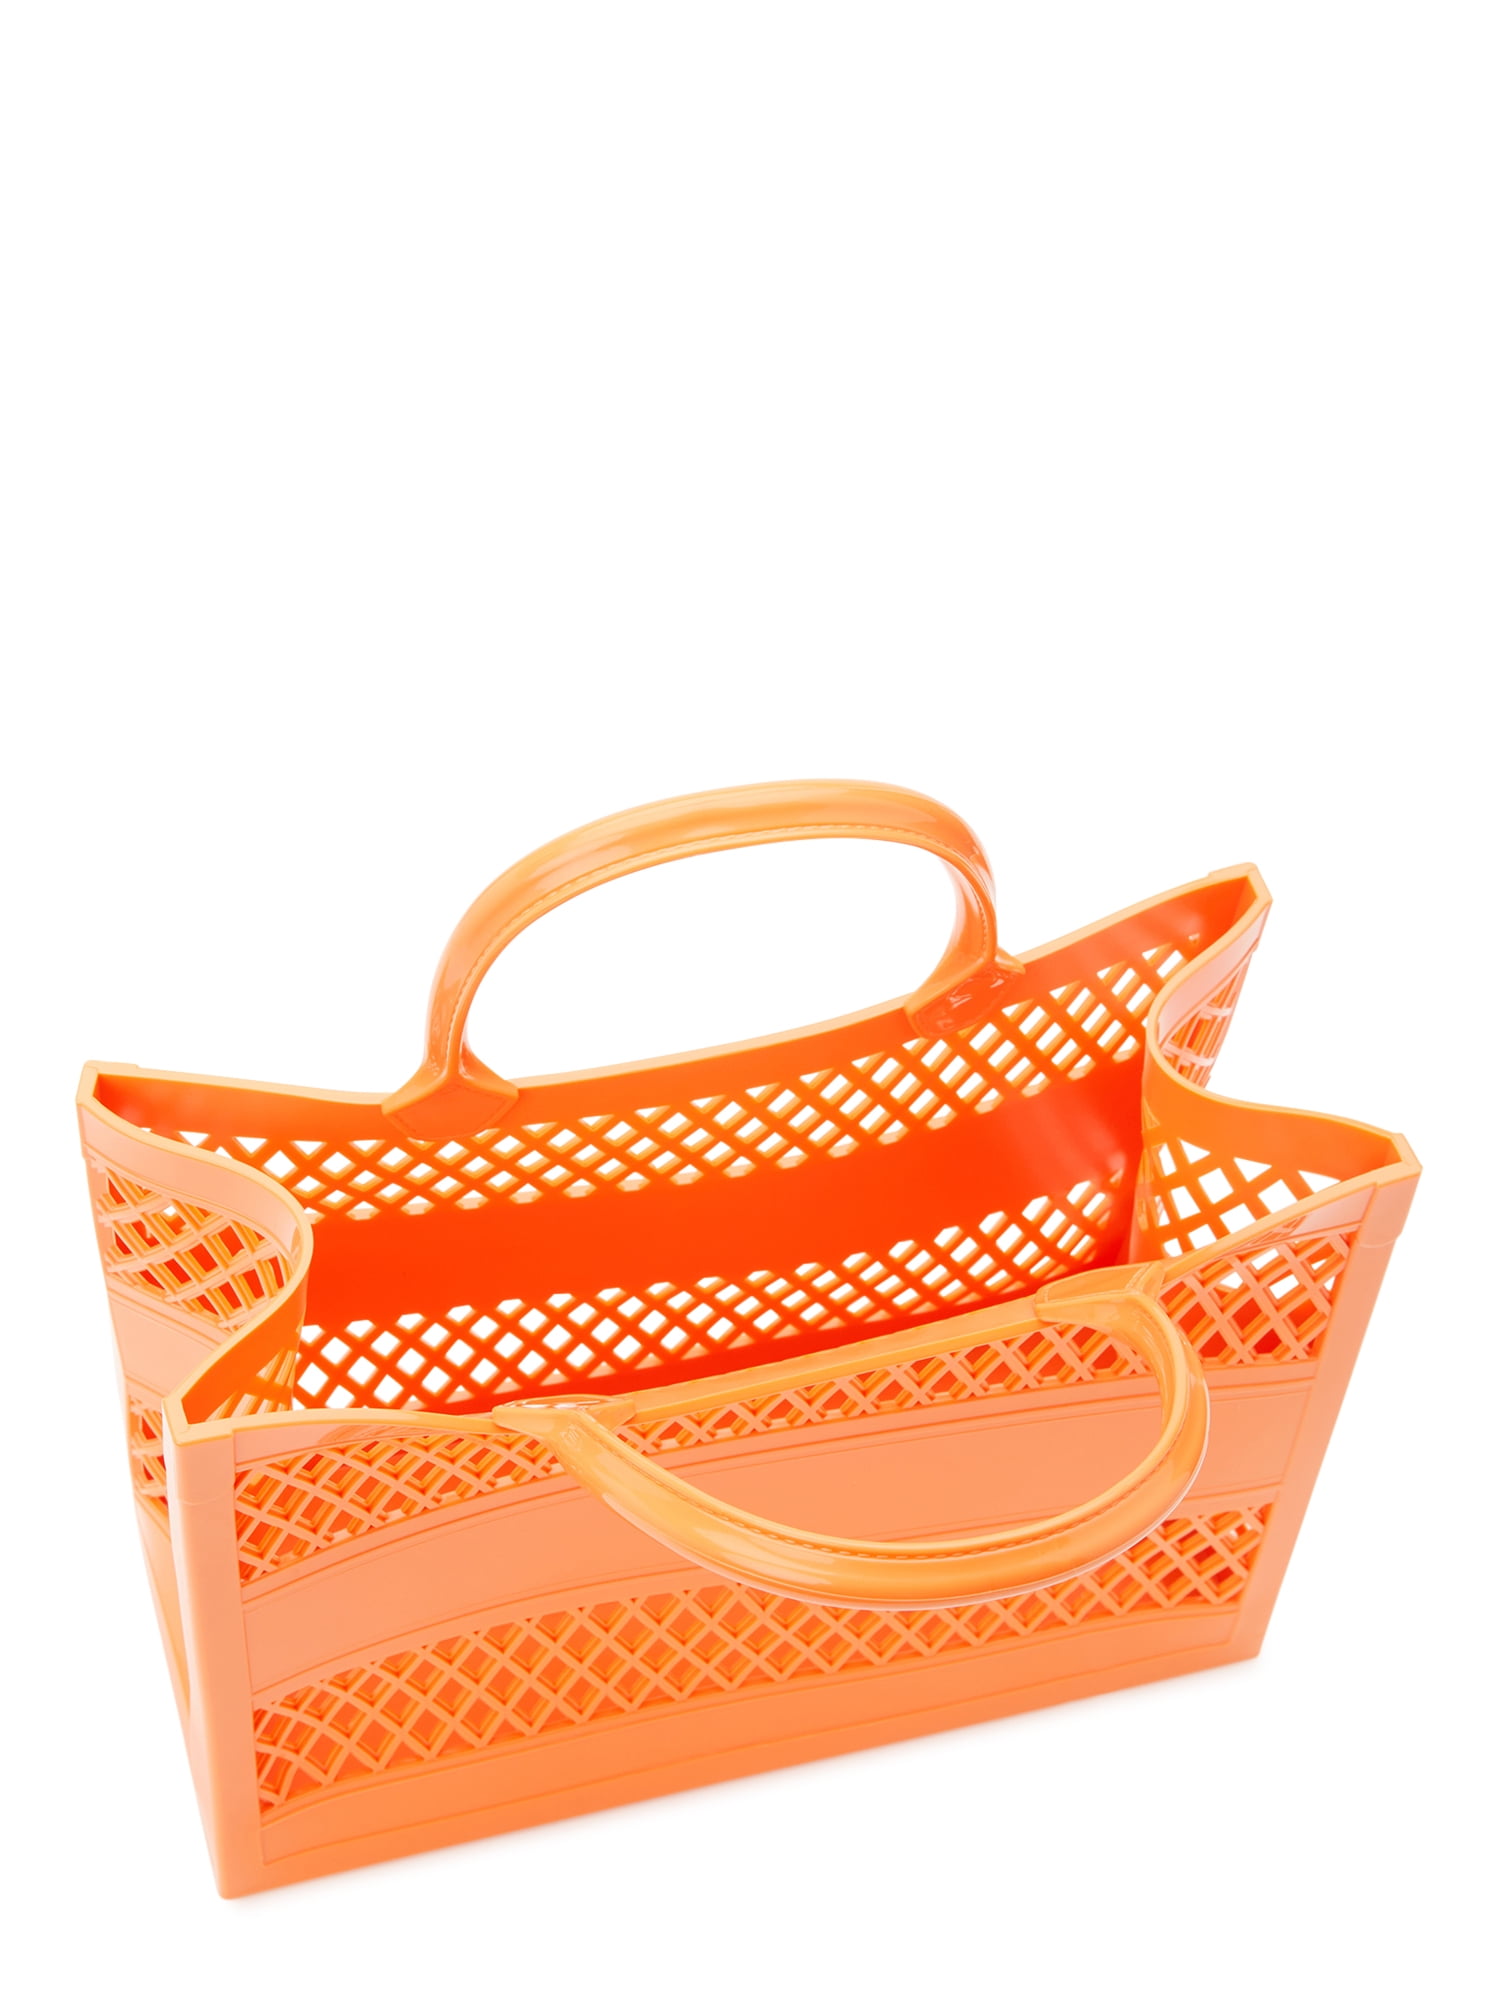 Orange Clear Quilted Jelly Bag Top Handle Transparent Tote Shopper Bag